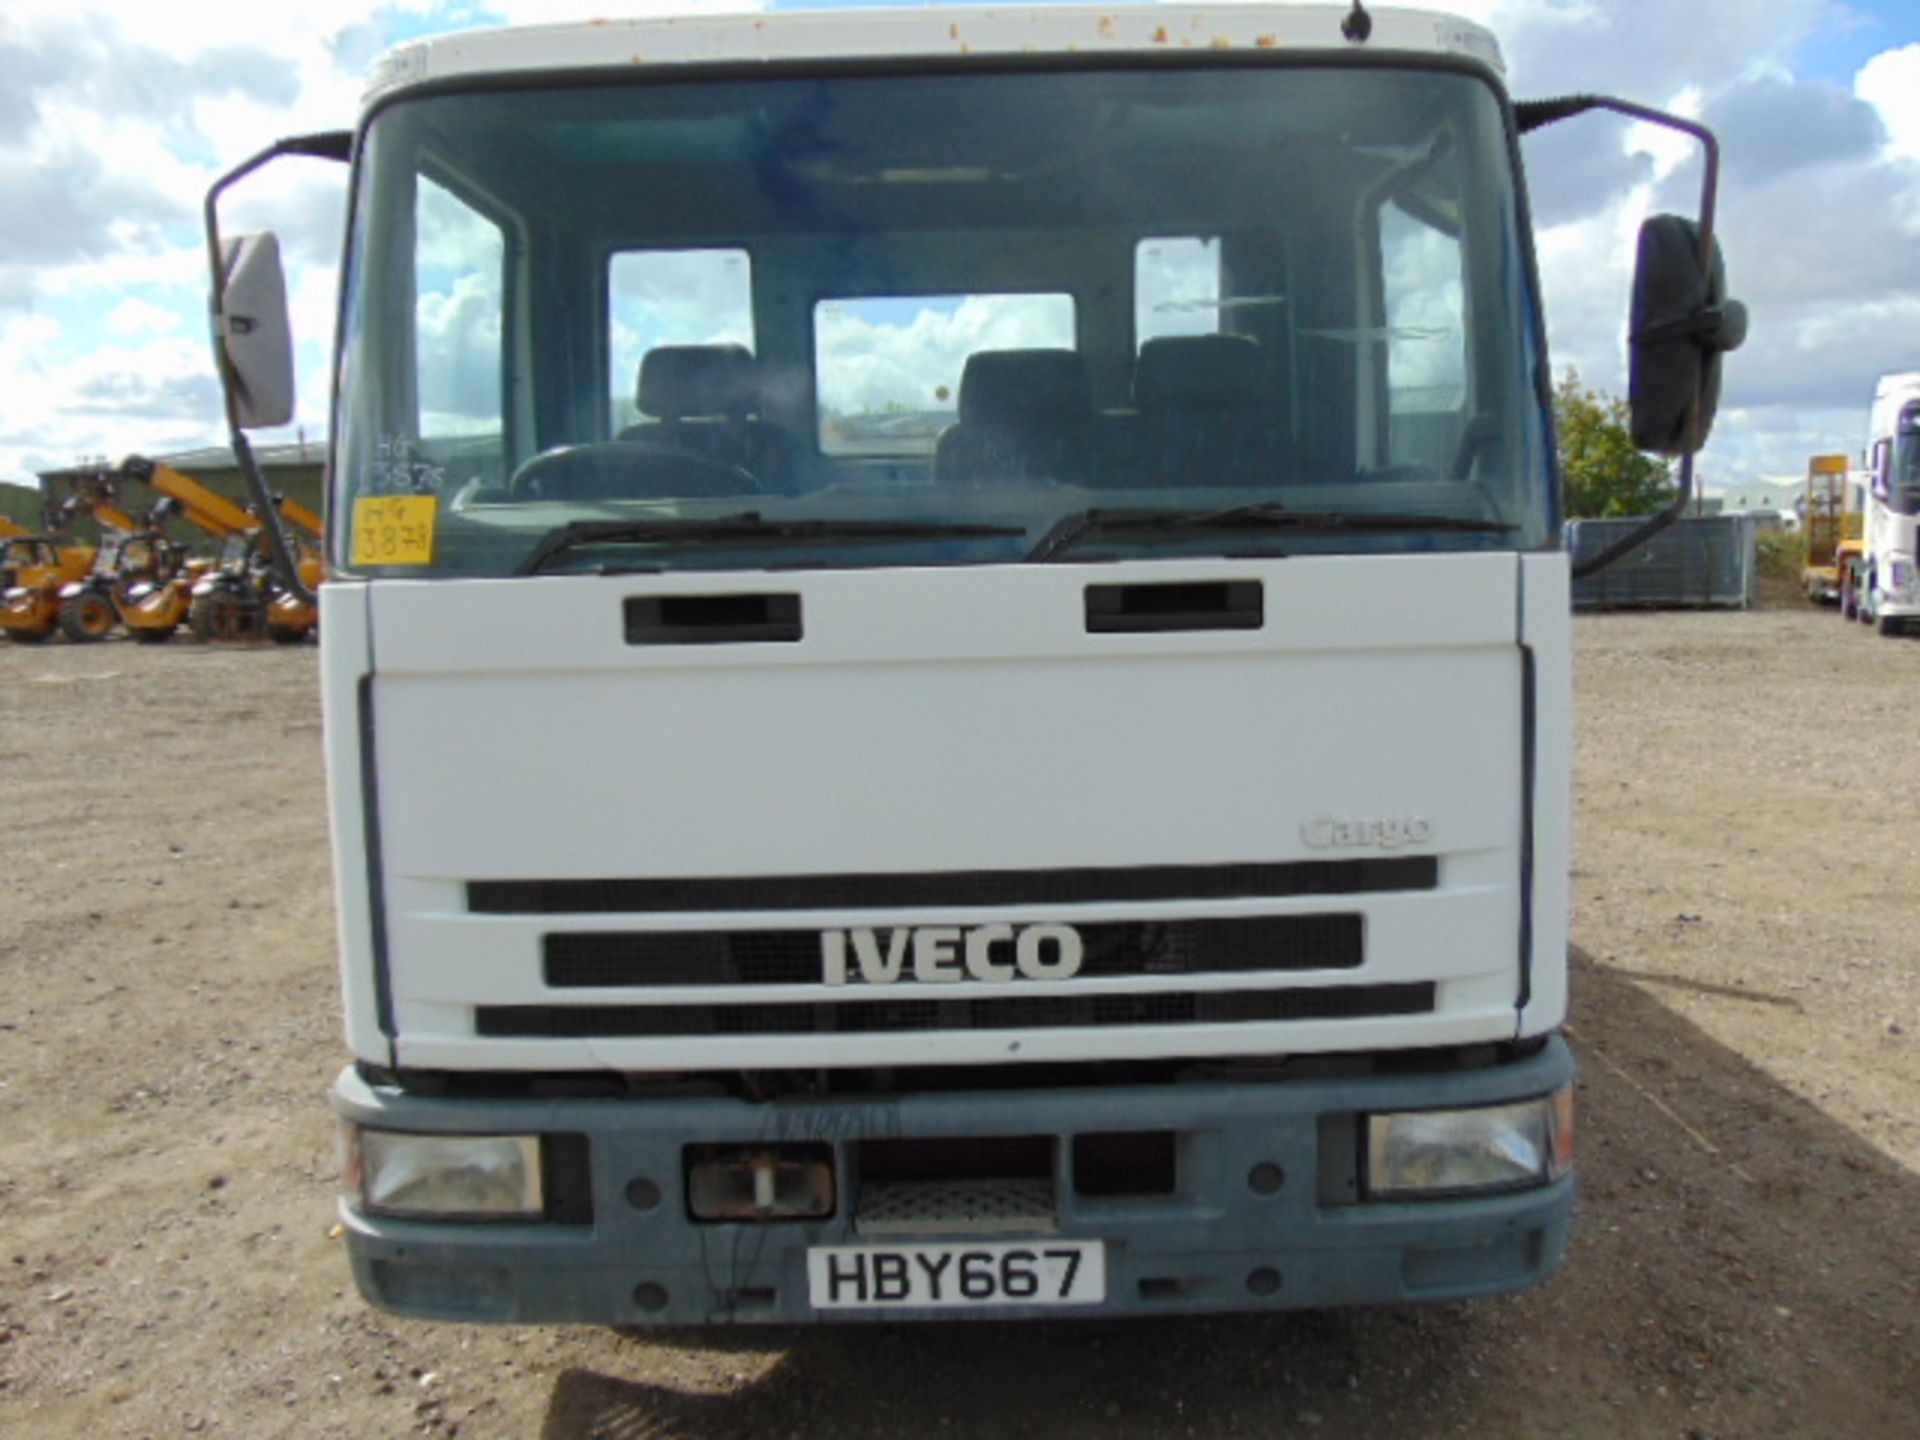 Ford Iveco Cargo 75E14 Complete with Rear Tail Lift - Image 2 of 21